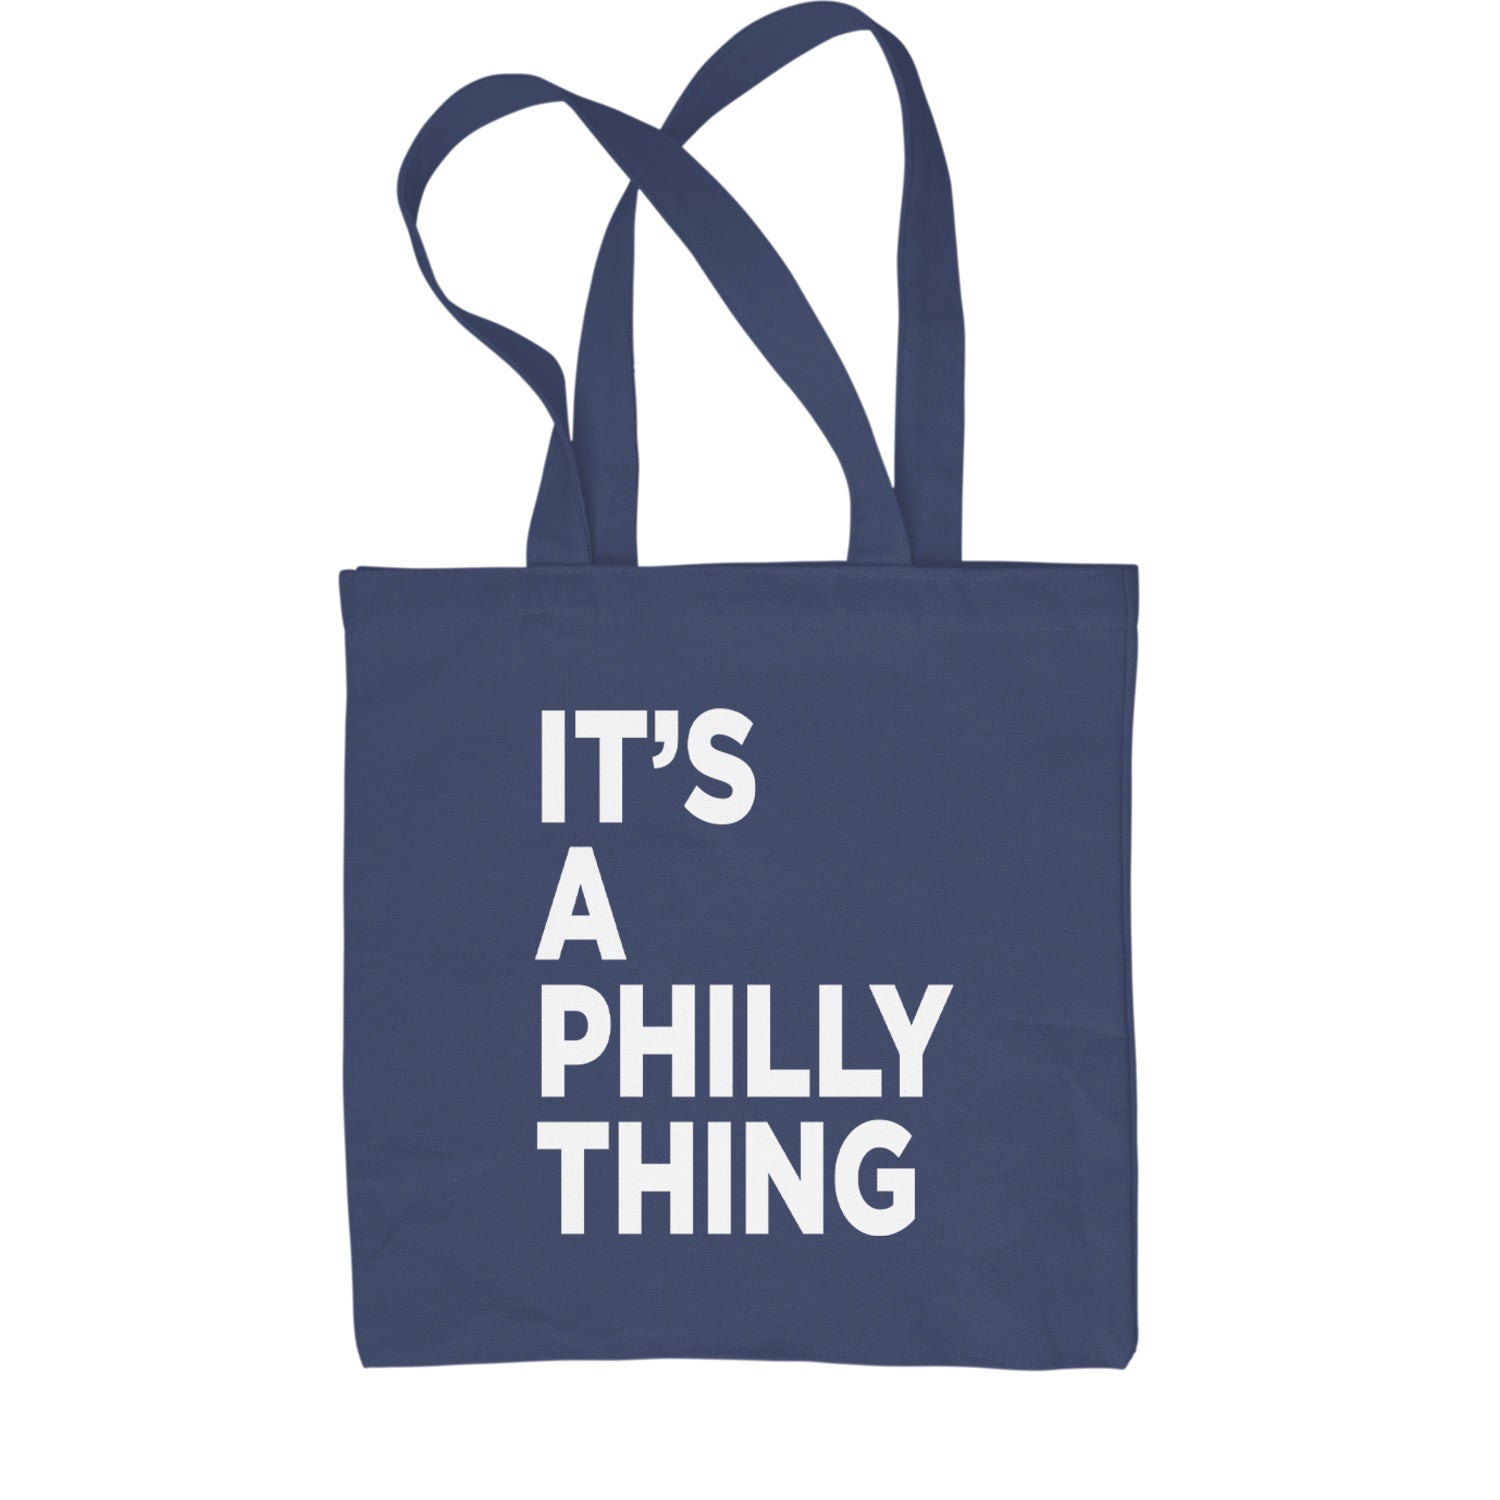 PHILLY It's A Philly Thing Shopping Tote Bag baseball, dilly, filly, football, jawn, morgan, Philadelphia, philli by Expression Tees